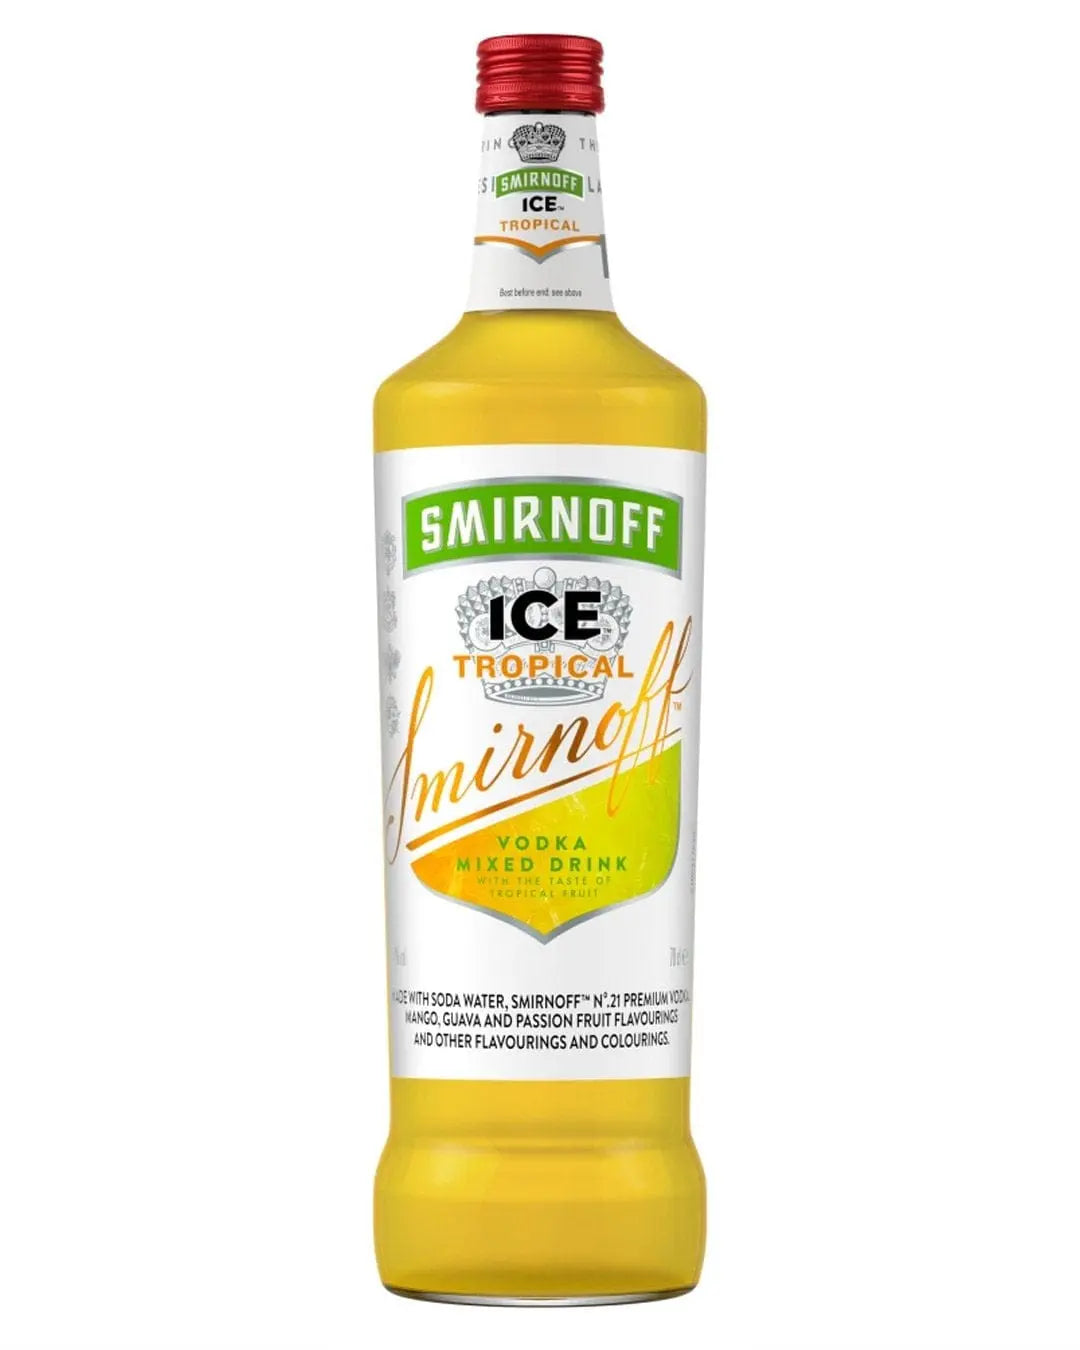 Smirnoff Ice Tropical Ready To Drink Vodka Cocktail, 70 cl Ready Made Cocktails 5410316964968